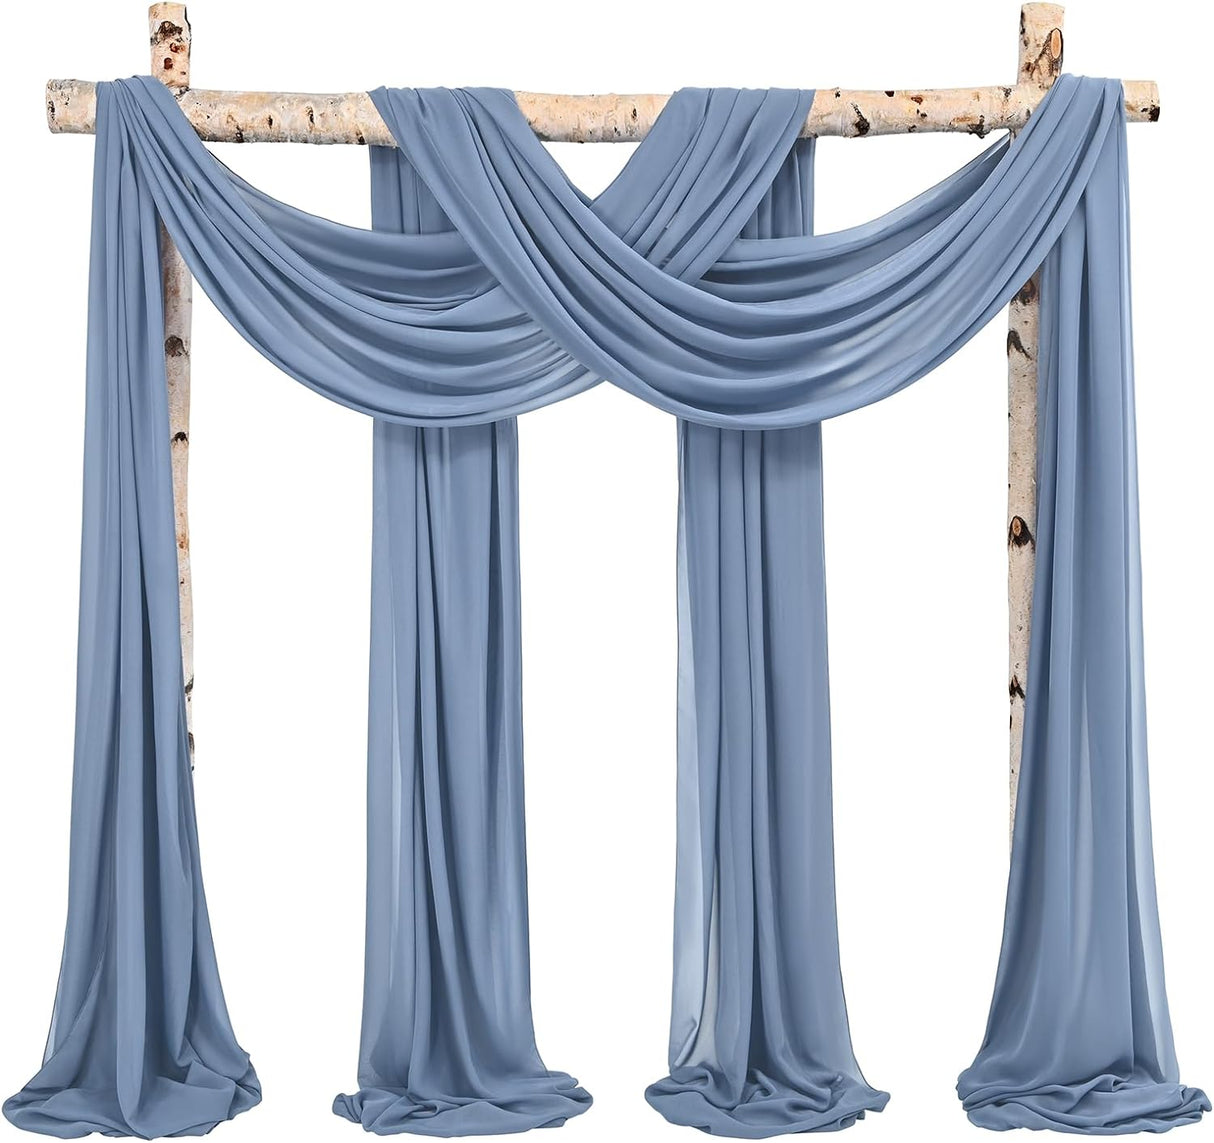 Wedding Arch Draping Fabric,4 Panels 28"x20ft Wedding Arch Drapes for Ceremony Chiffon Fabric Drapes Arbor Drapery Wedding Arch Decorations for Reception Sheer Backdrop Curtains for Party Swag